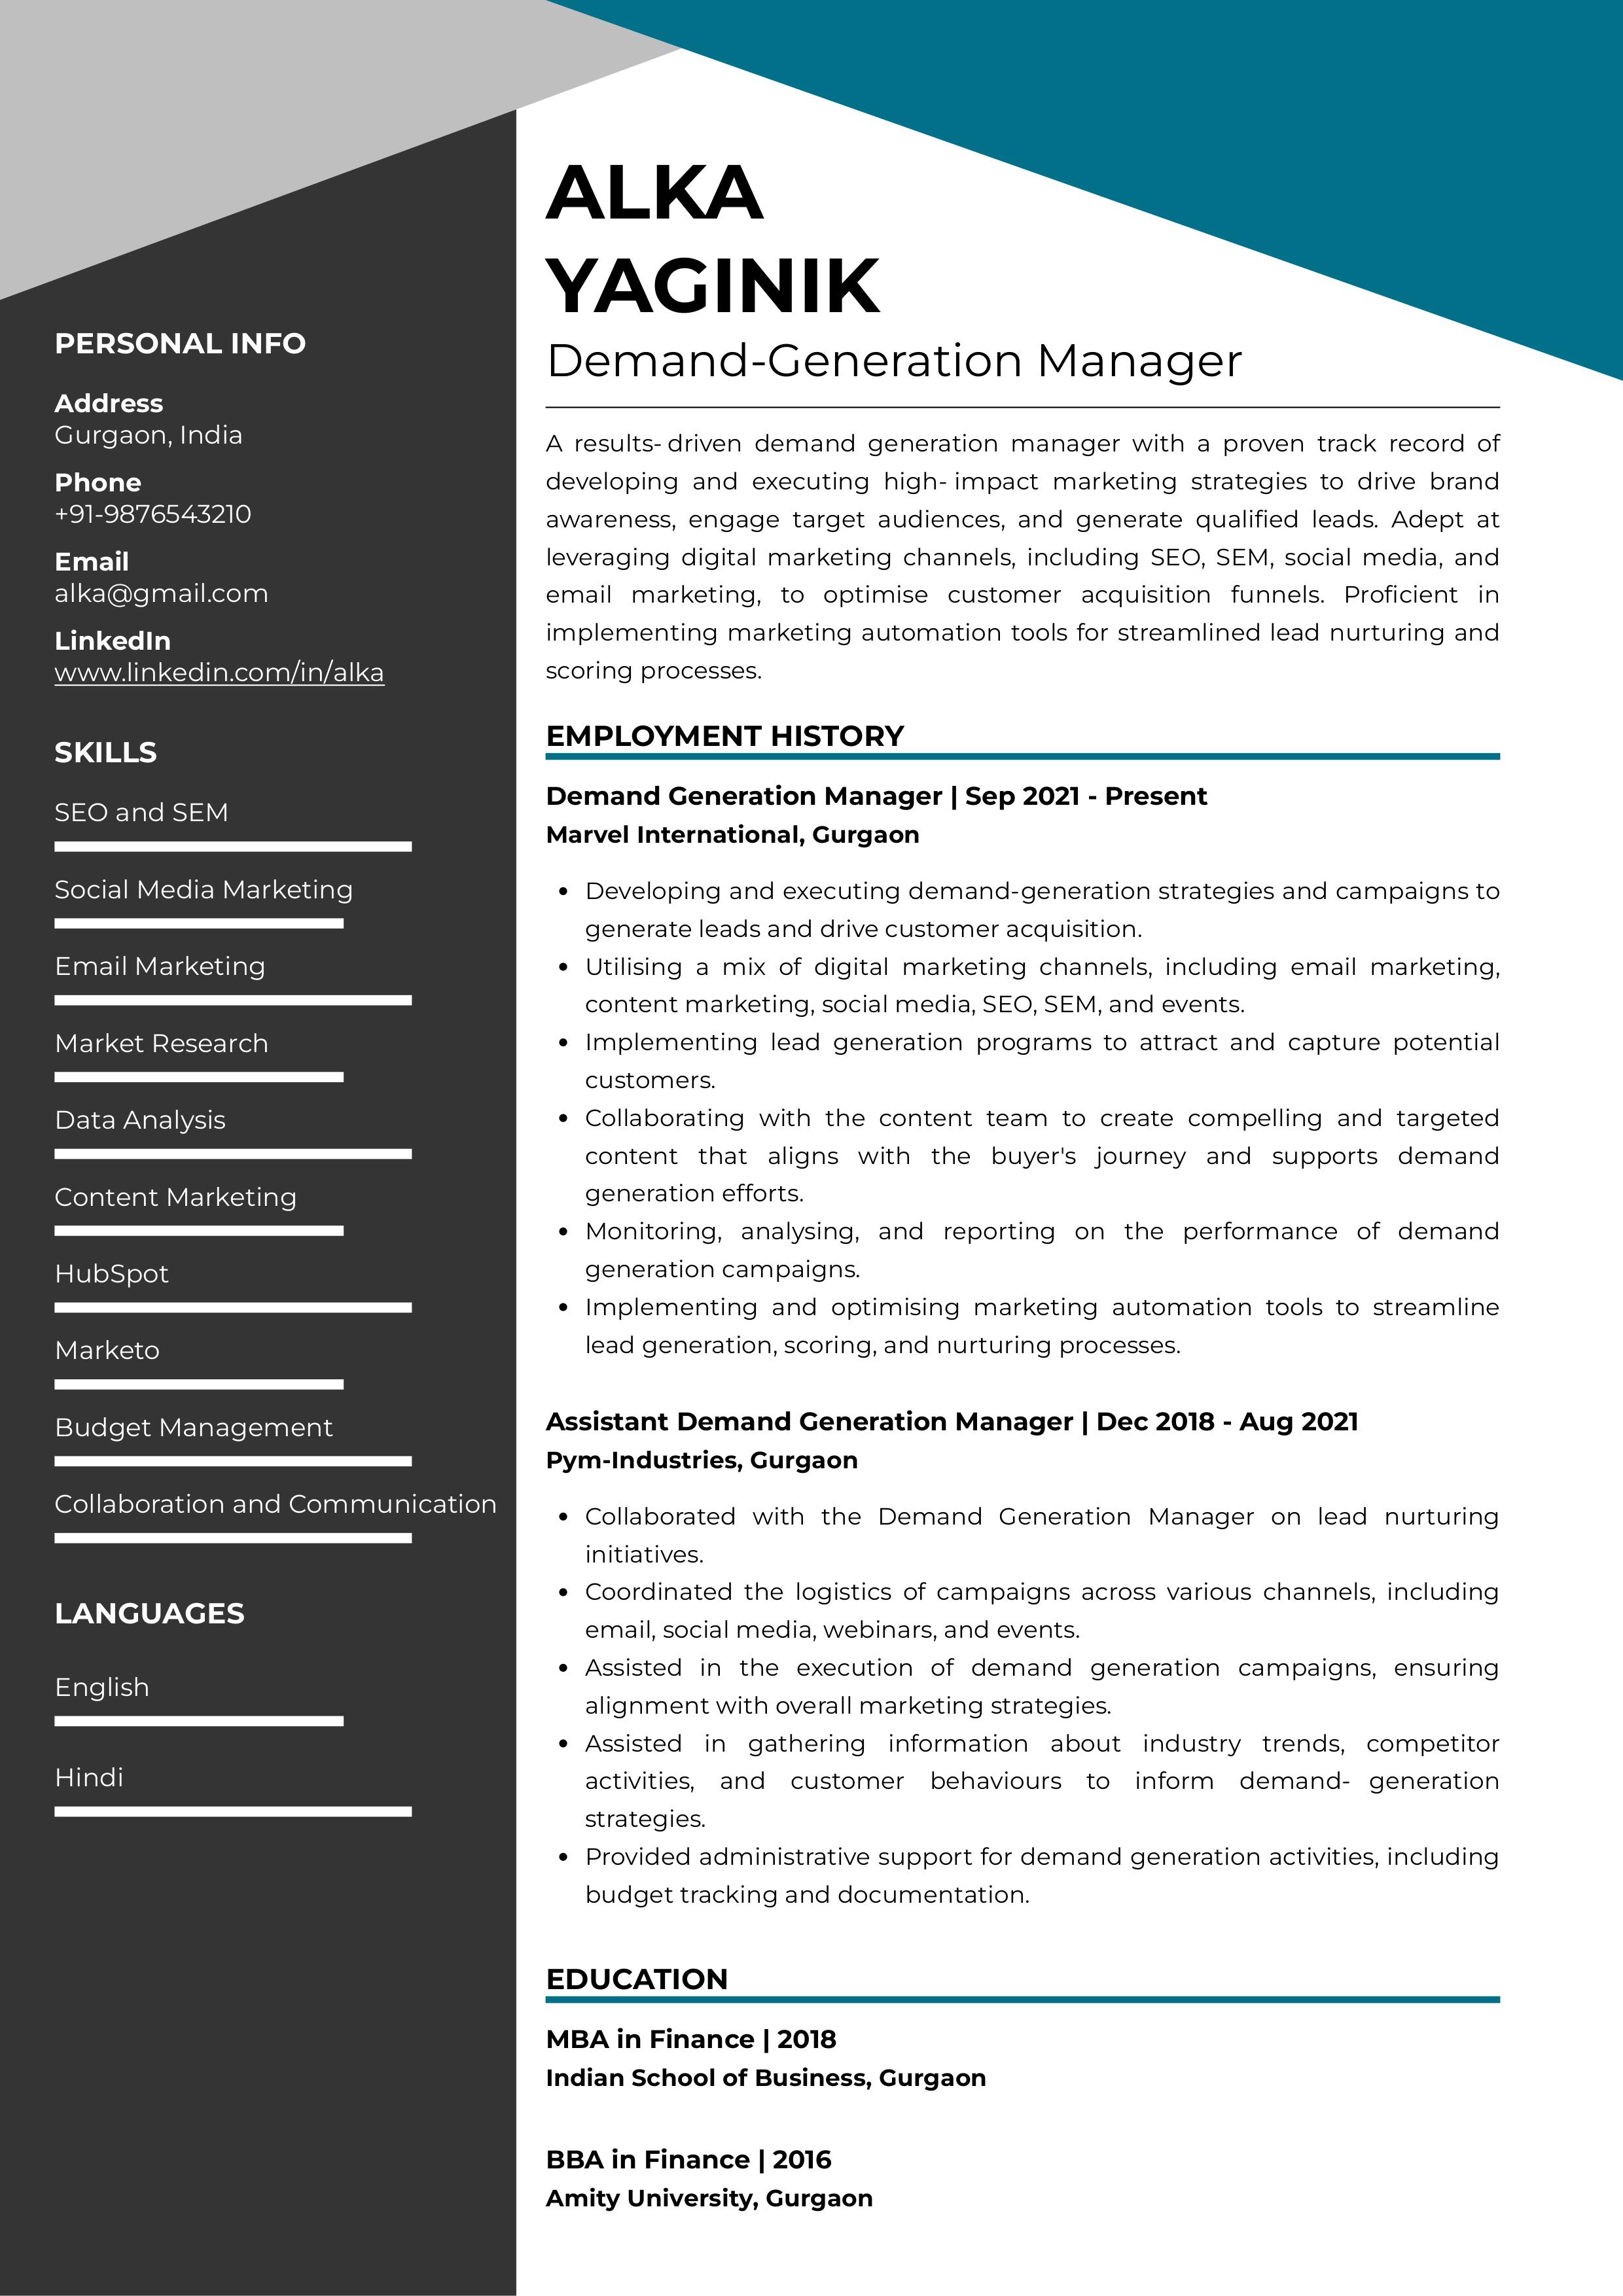 Sample Resume of Demand Generation Manager | Free Resume Templates & Samples on Resumod.co